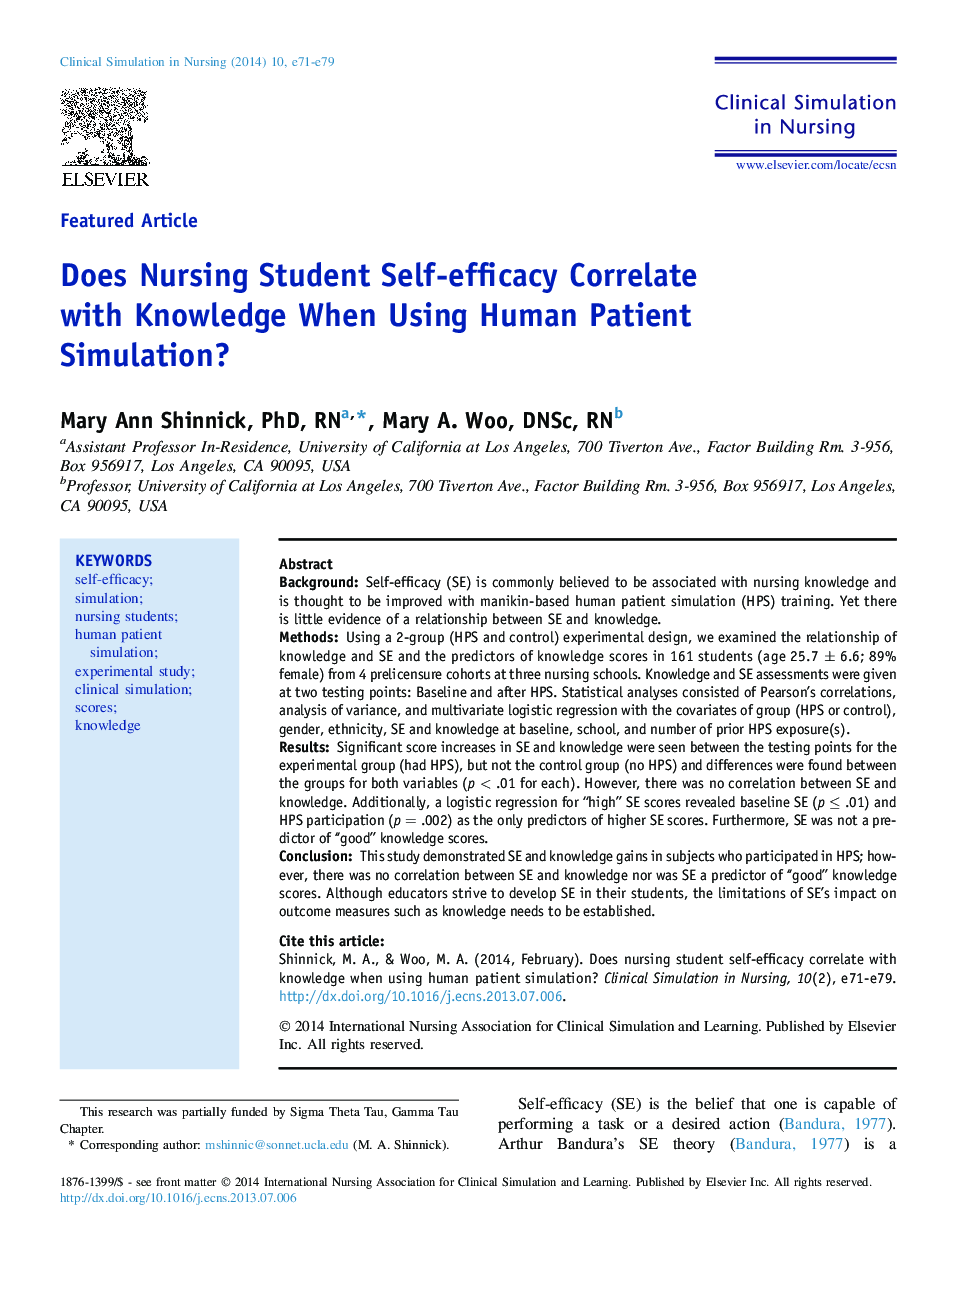 Featured ArticleDoes Nursing Student Self-efficacy Correlate with Knowledge When Using Human Patient Simulation?